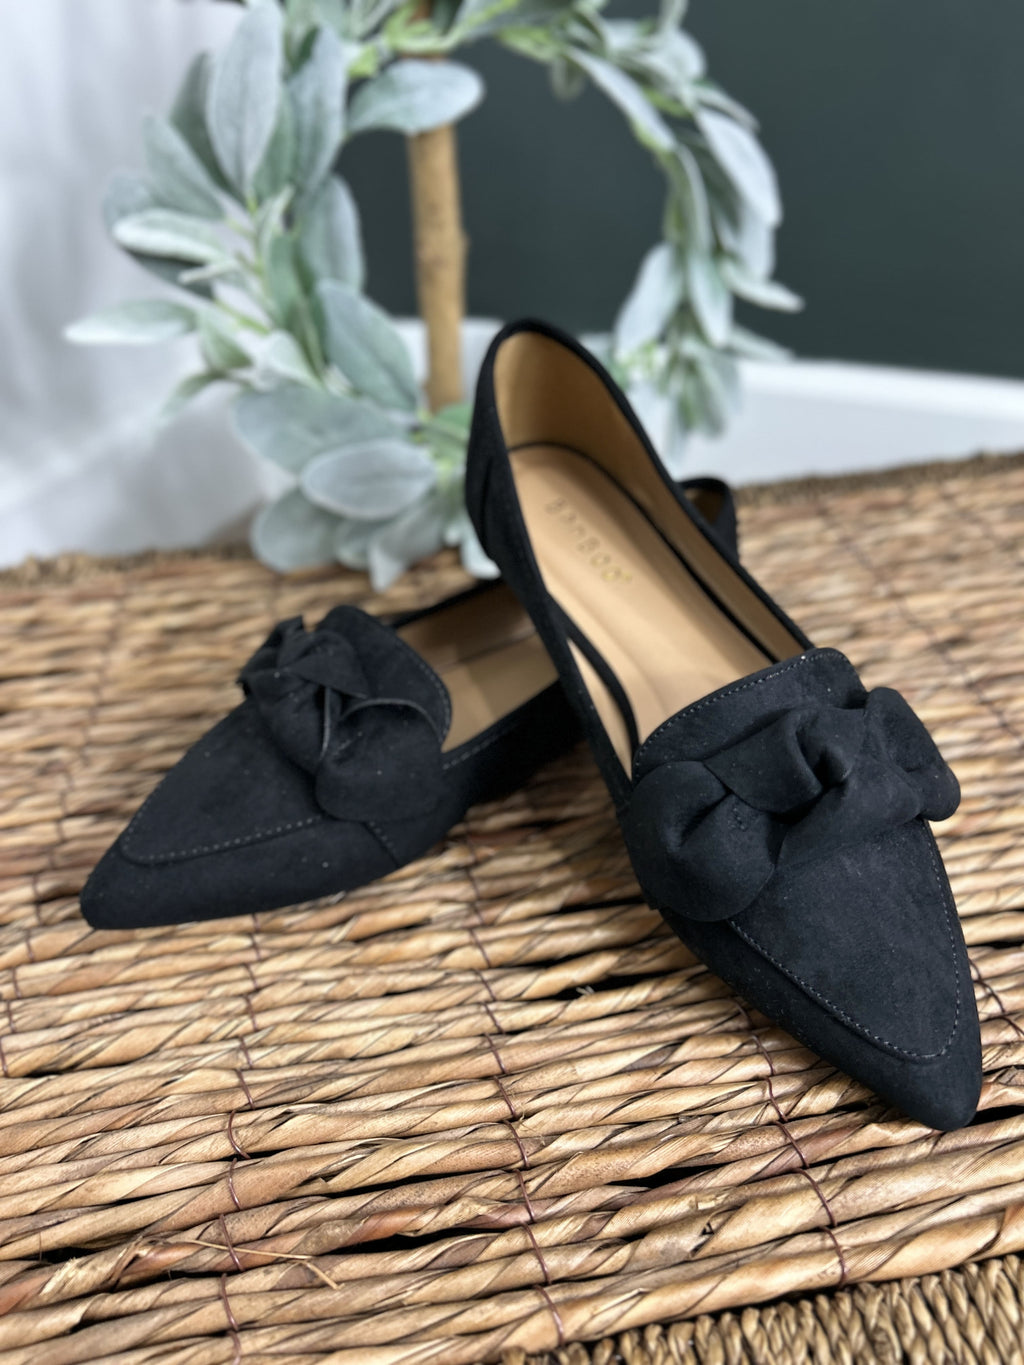 Women's black slip on flats with pointed toe and decorative bow tie on top.